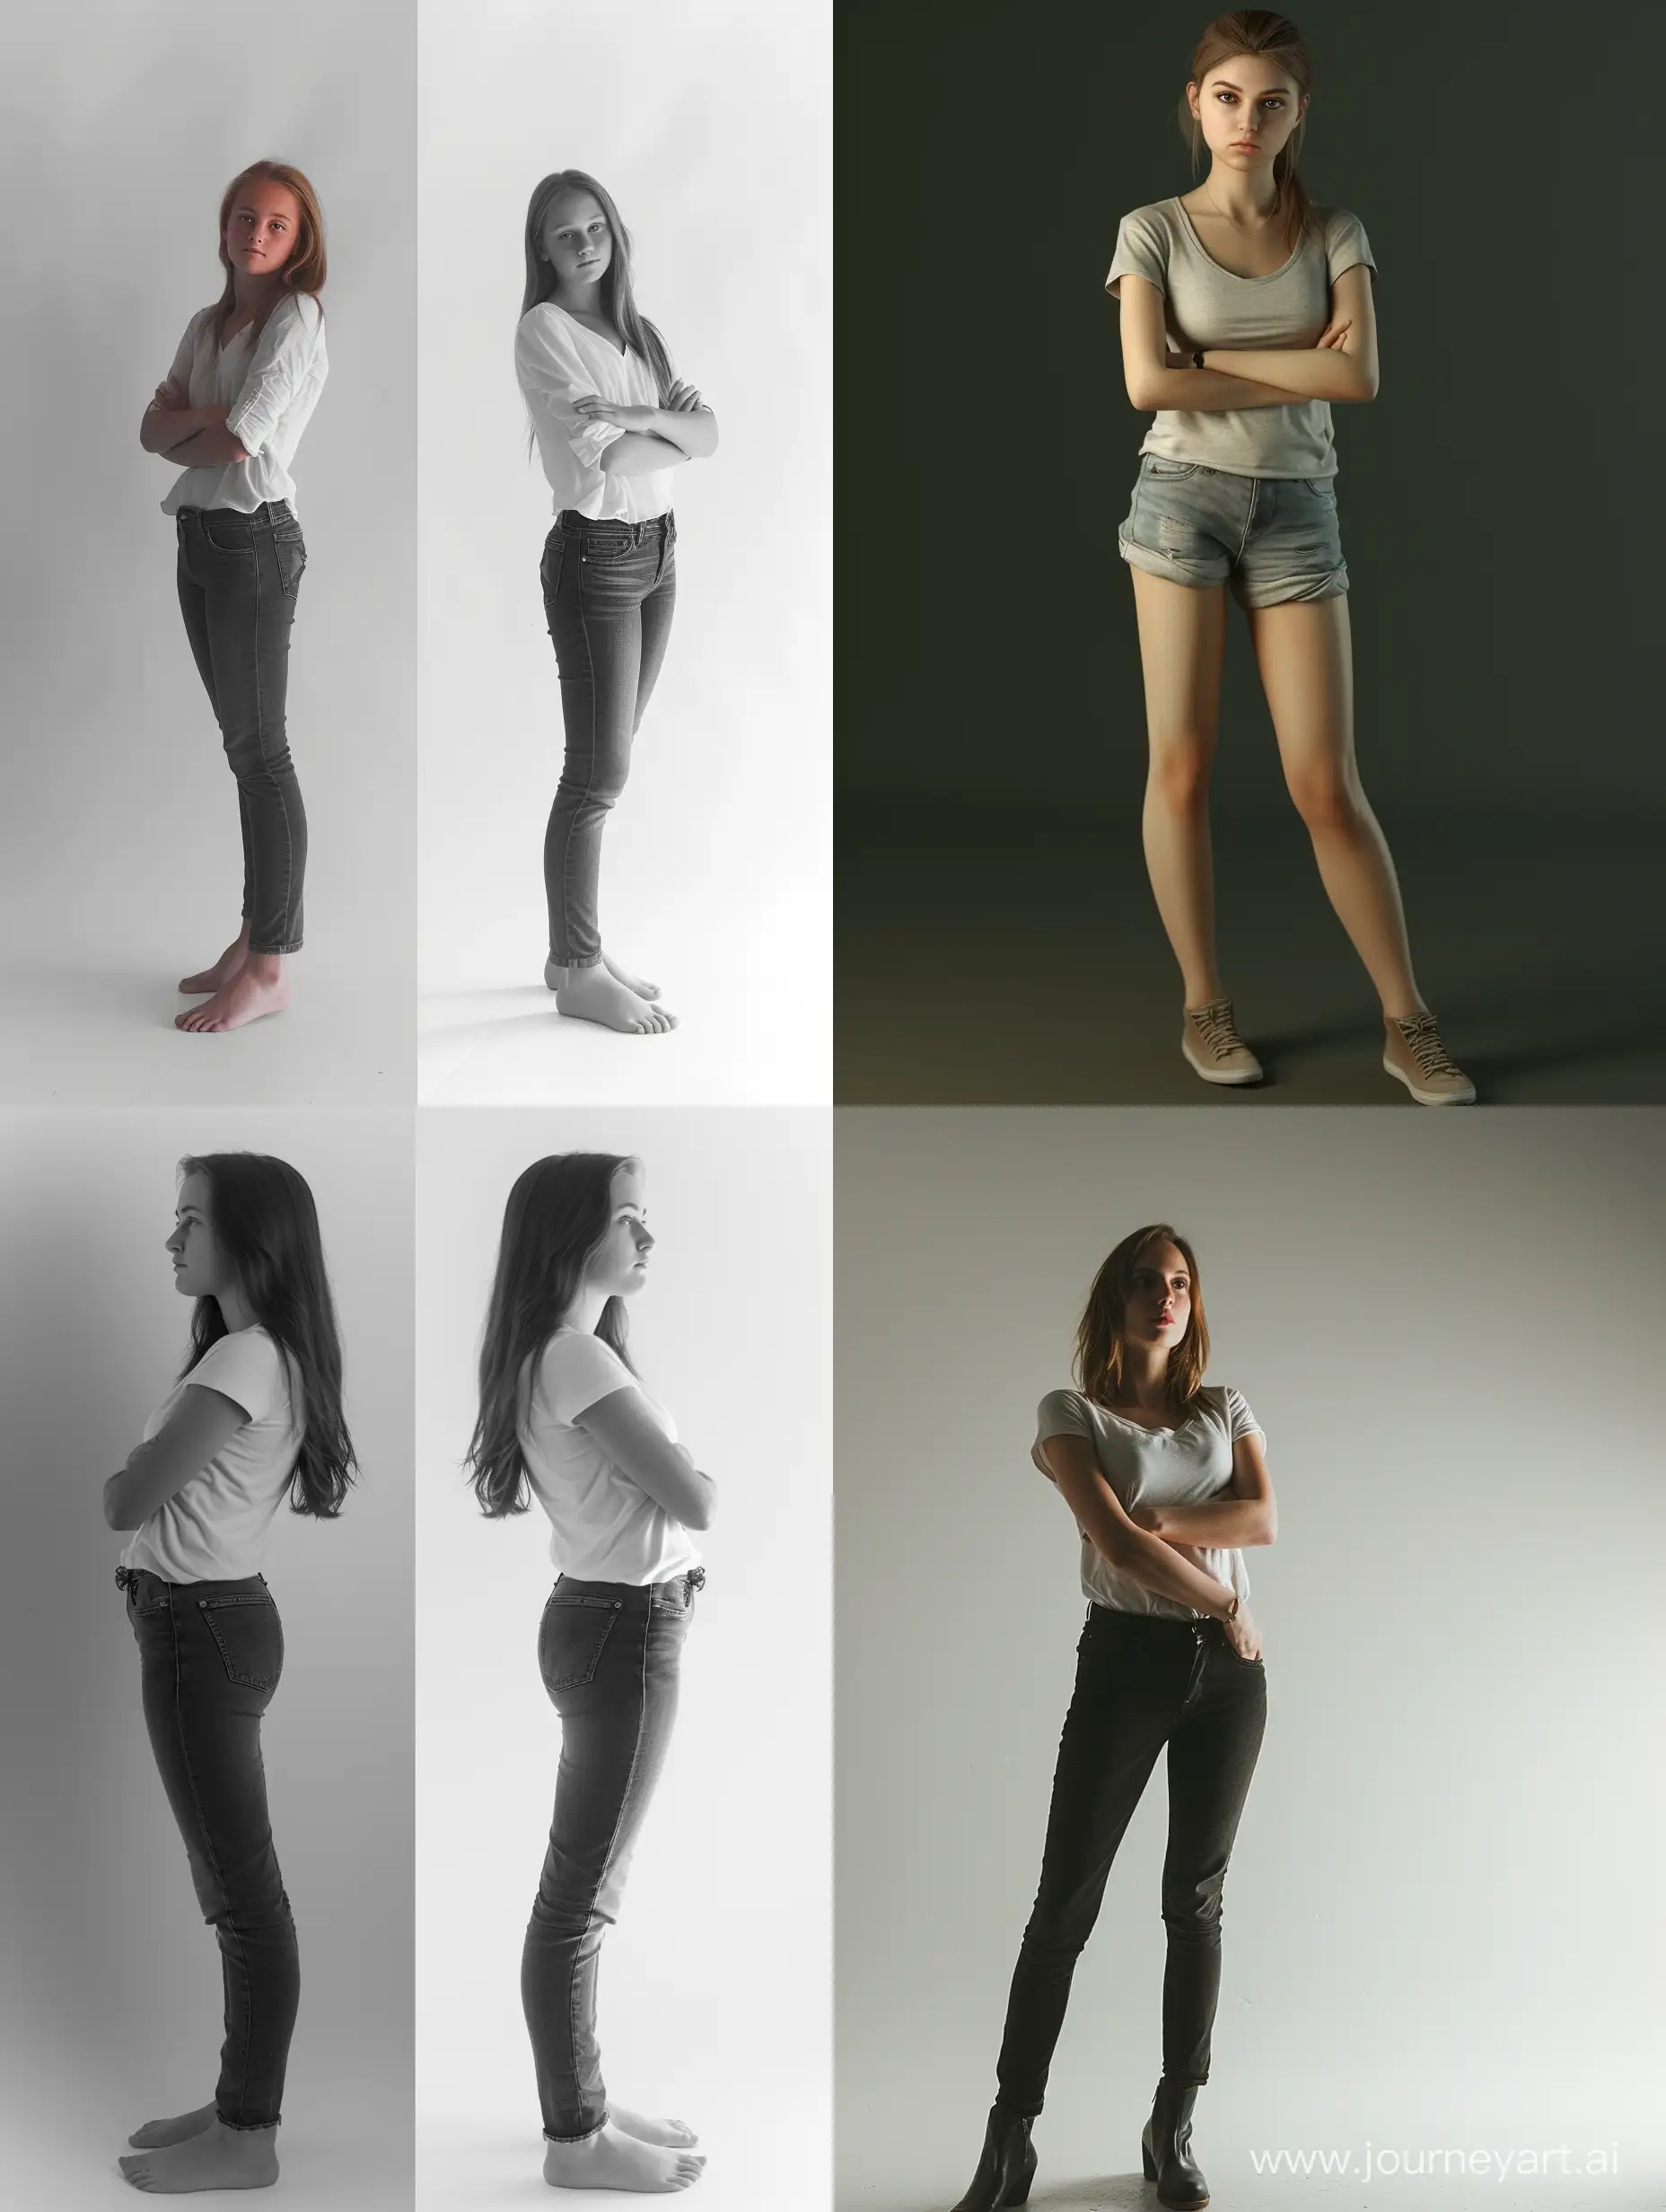 Graceful-Standing-Girl-Poses-for-Perfect-Photoshoot